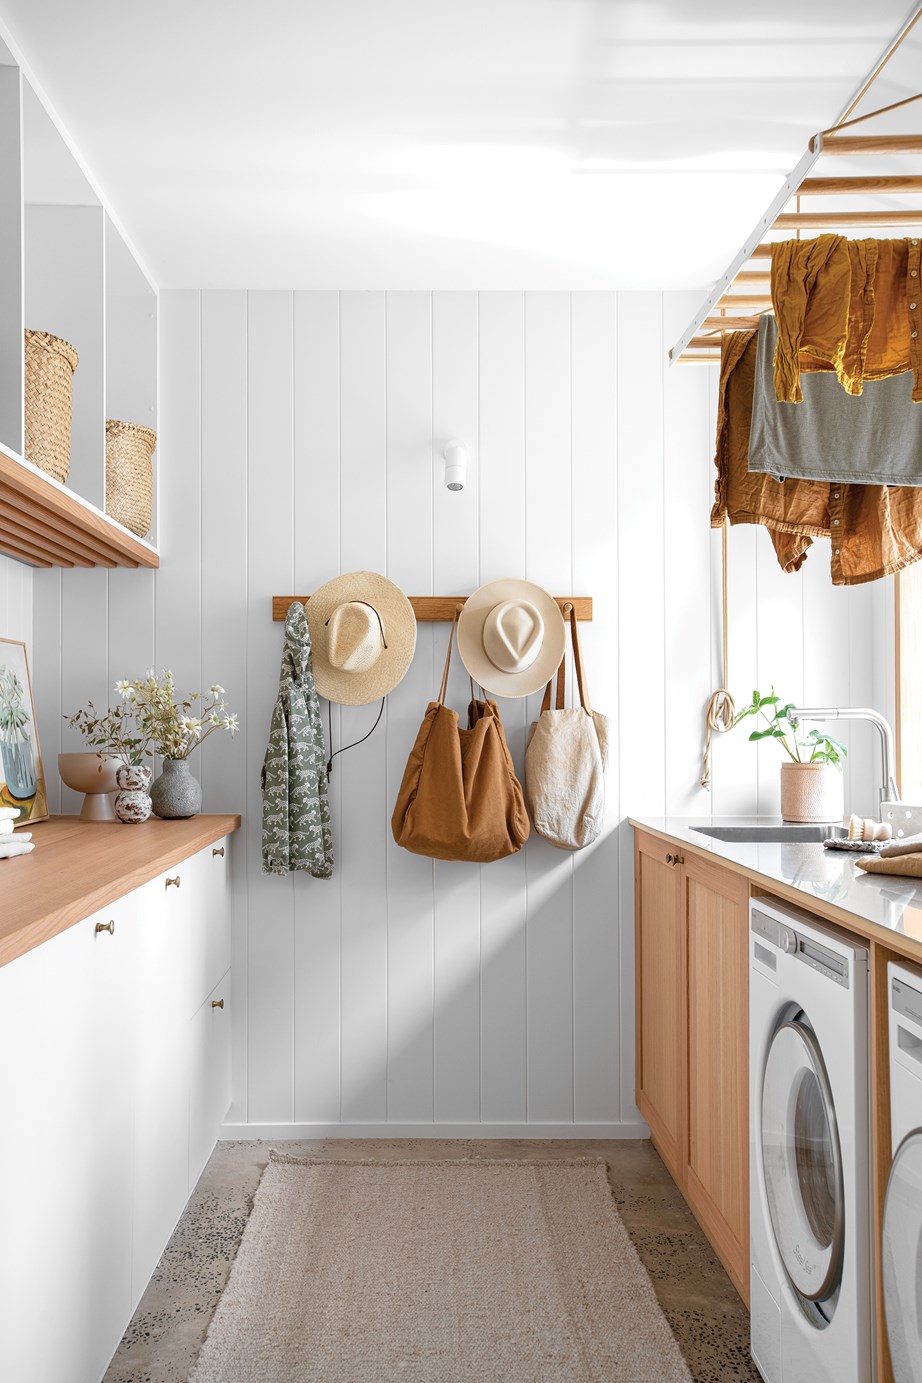 The laundry in this [low-tox, sustainable home](https://www.homestolove.com.au/sustainable-home-byron-hinterland-23565|target="_blank"), features a functional galley layout and a mix of clever (and stylish!) storage solutions, from wall hooks to a suspended clothes drying rack.